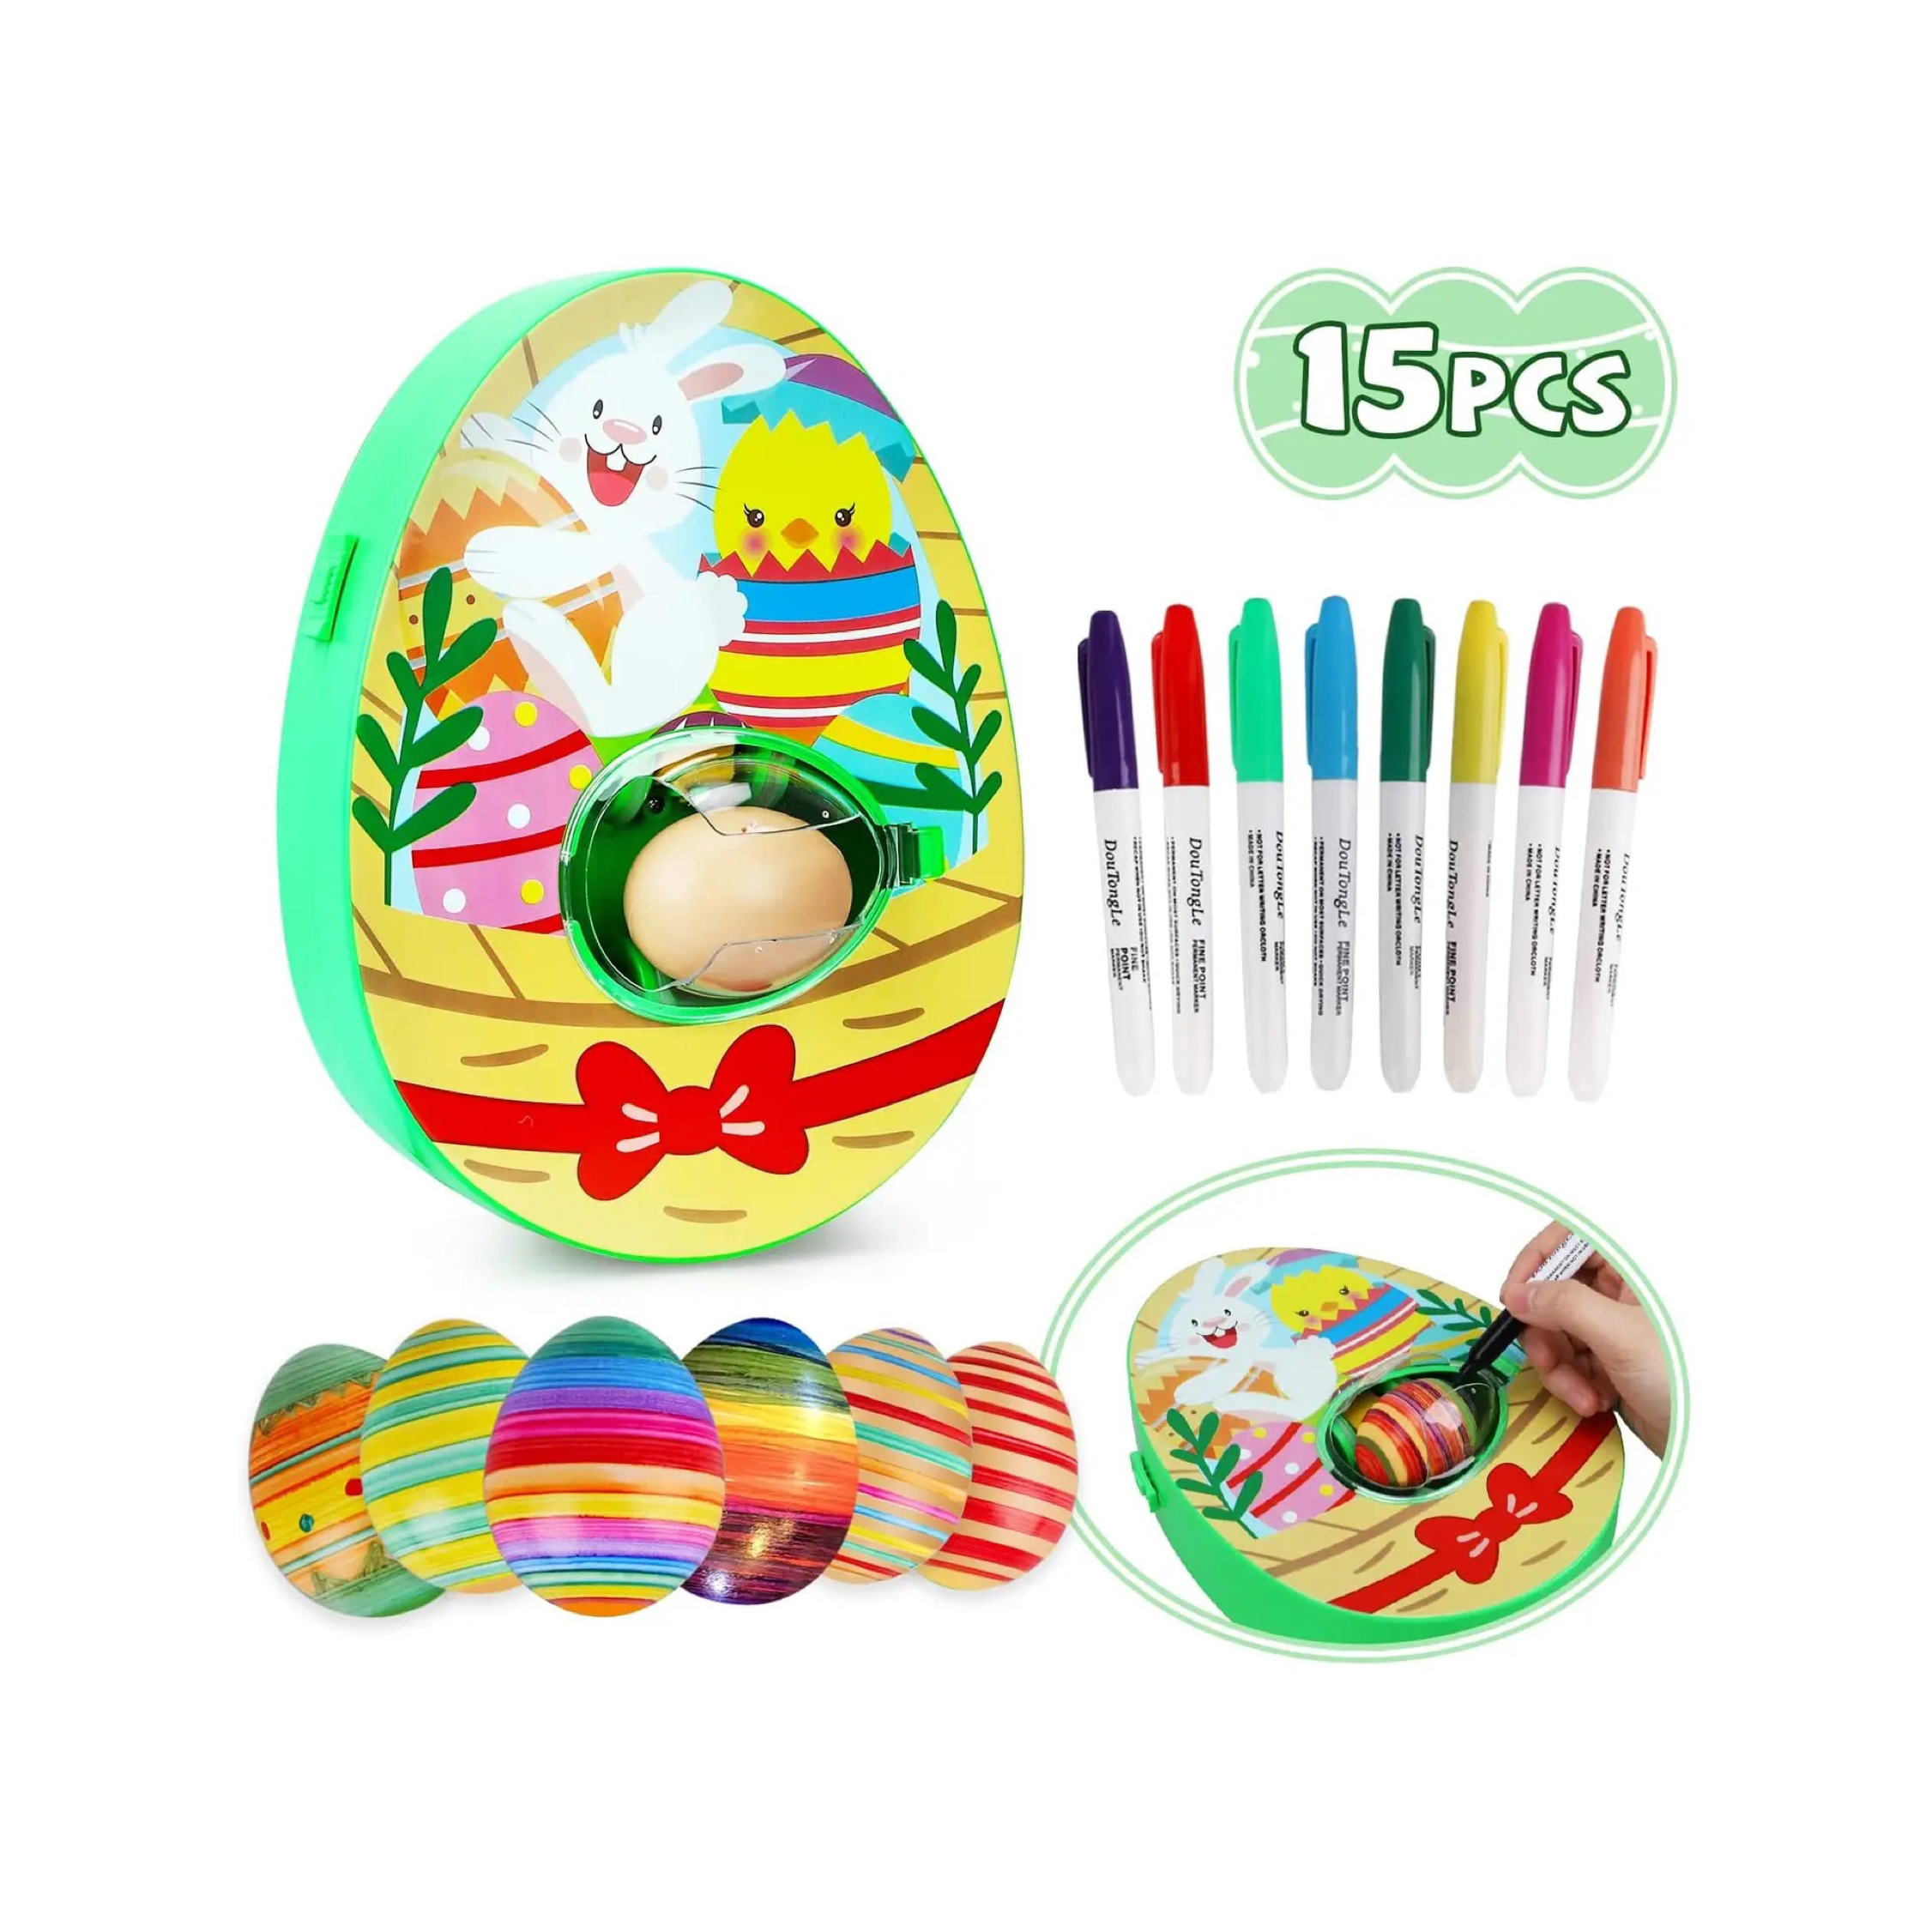 Decorate Your Easter Eggs With Crayons - The Make Your Own Zone